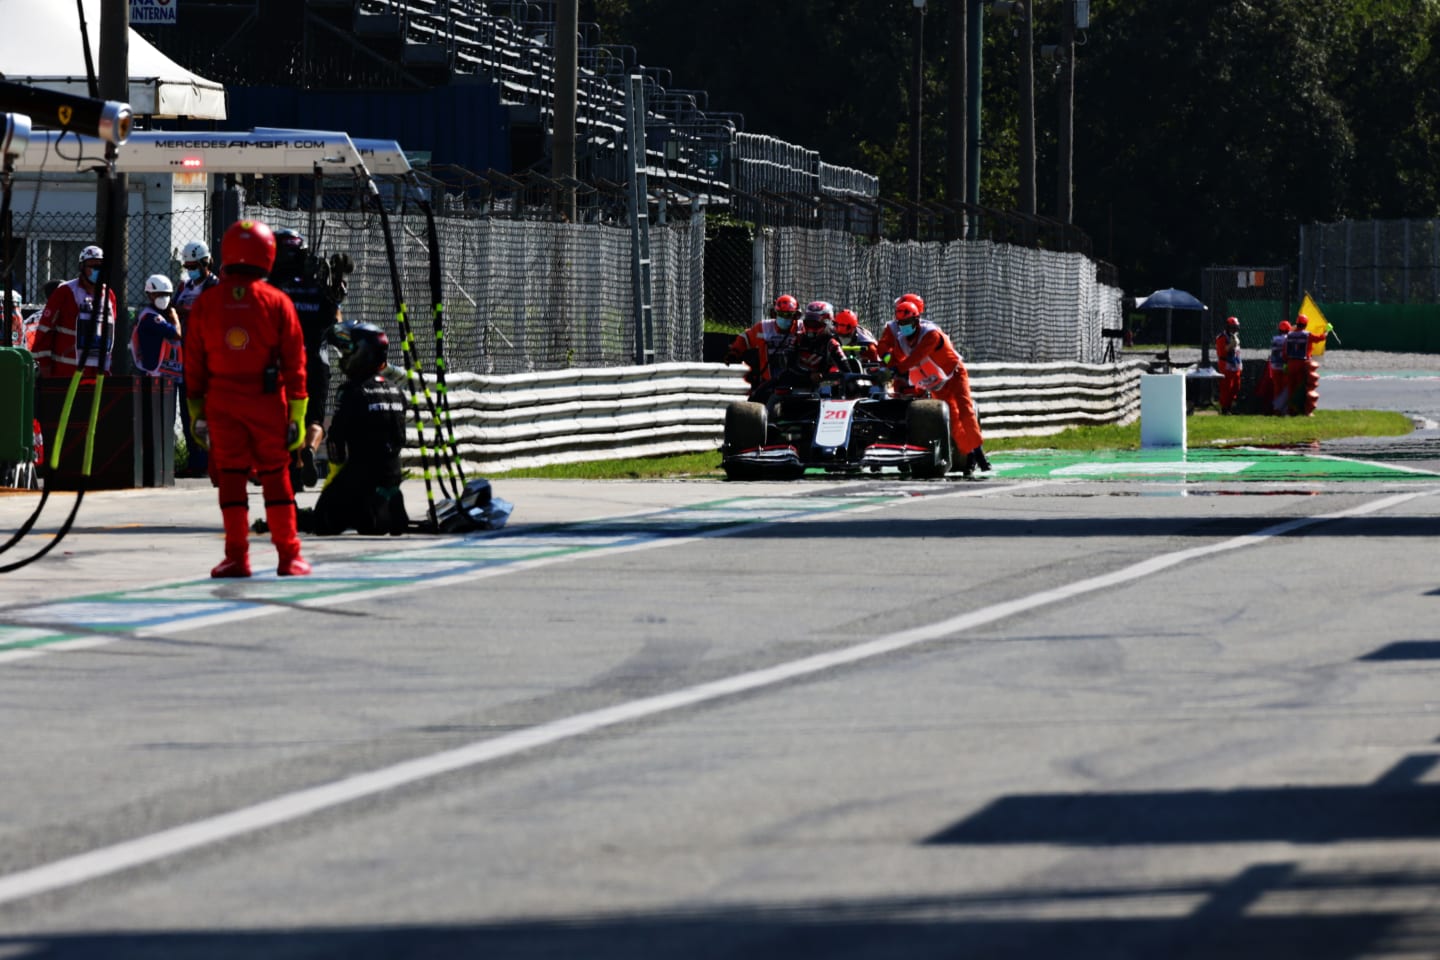 MONZA, ITALY - SEPTEMBER 06: The car of Kevin Magnussen of Denmark and Haas F1 is pushed back into